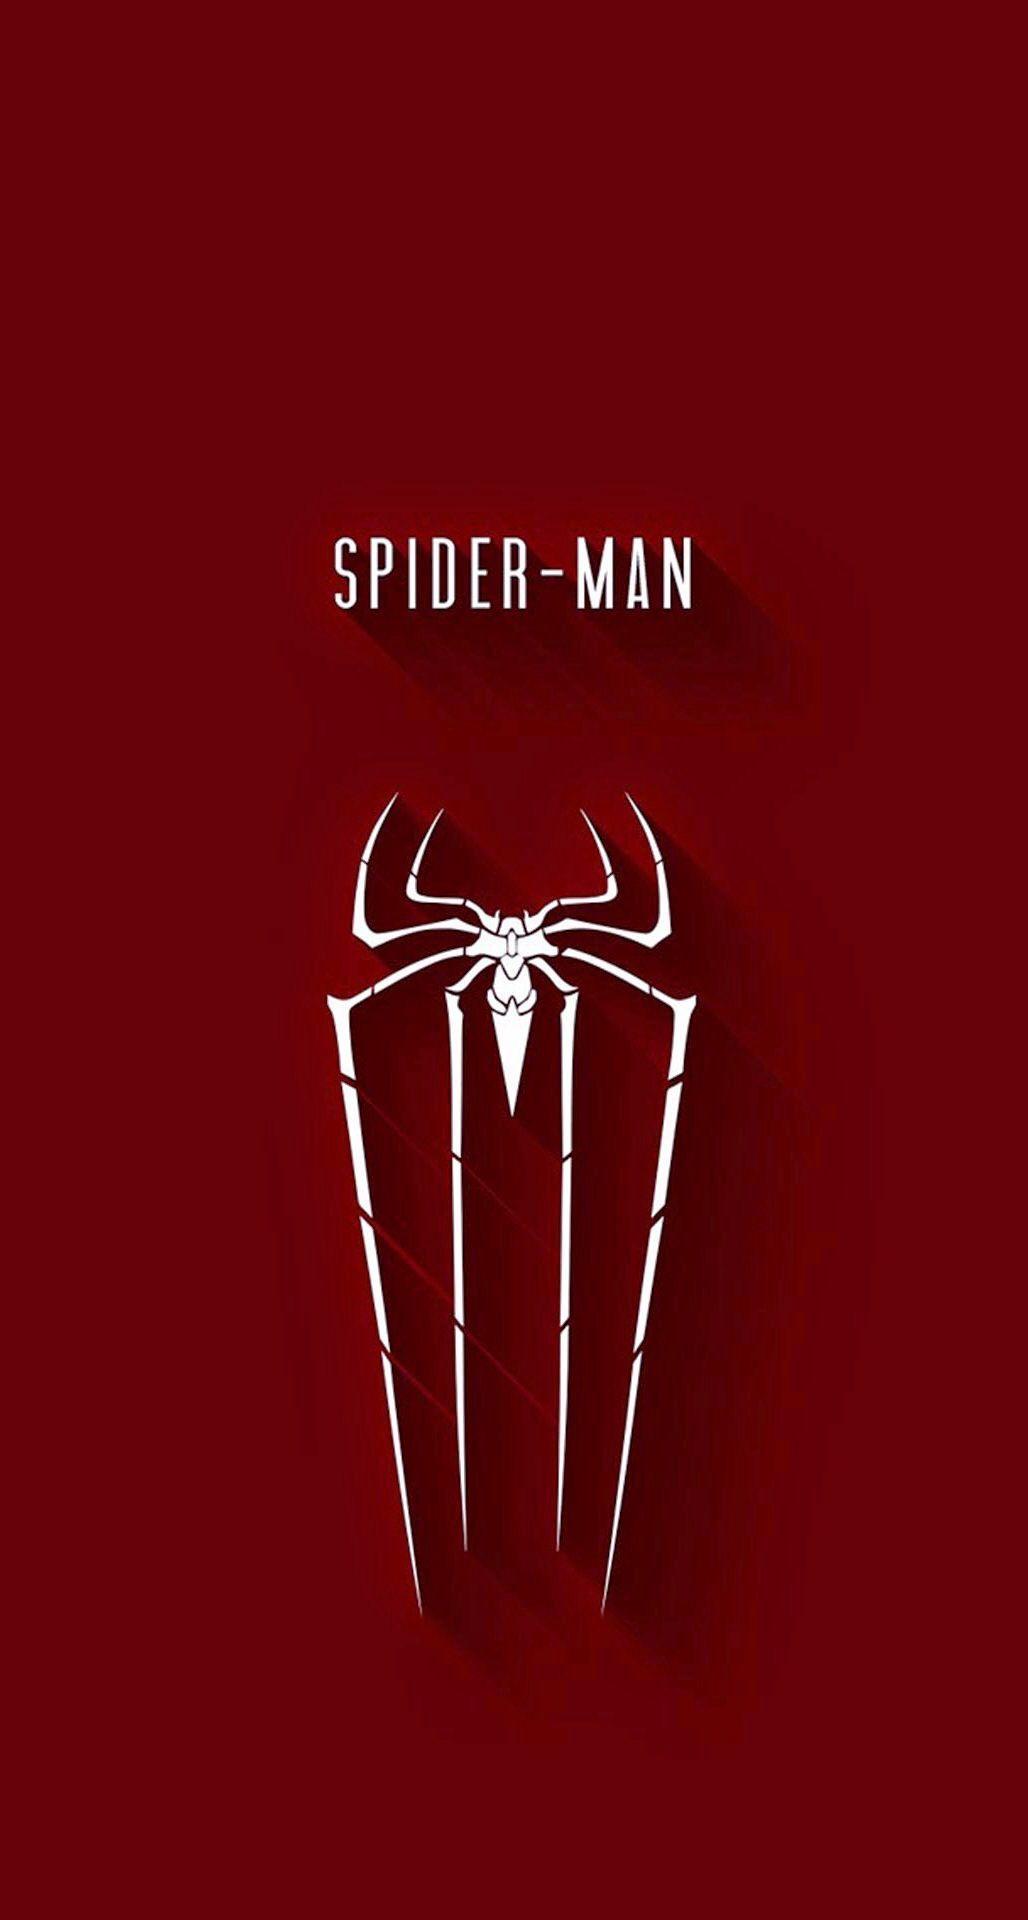 Spider-Man Logo - Spiderman logo. SPIDEY. Spiderman, Marvel and Spider